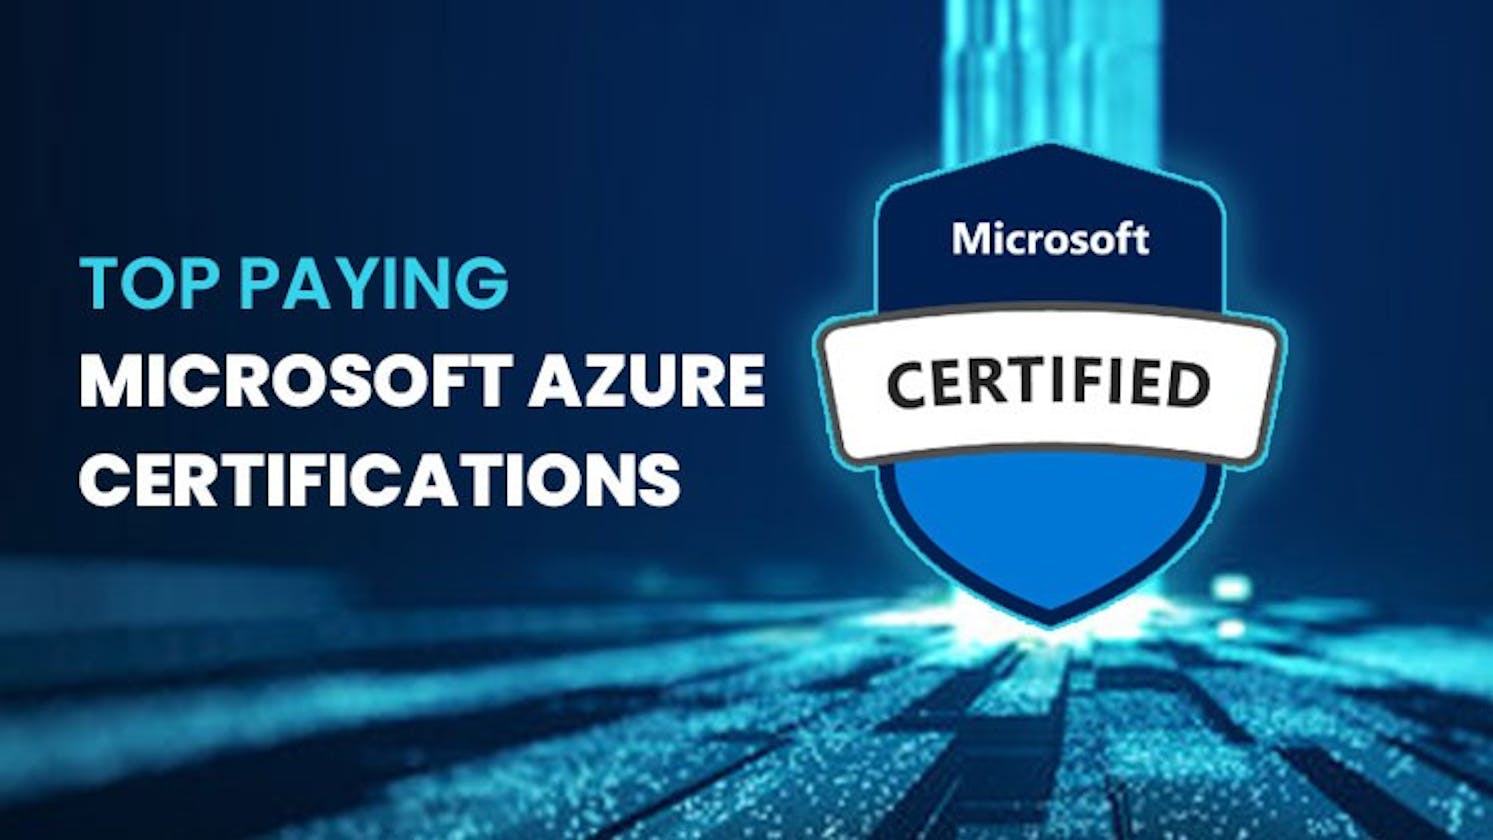 Introduction to Azure Certifications